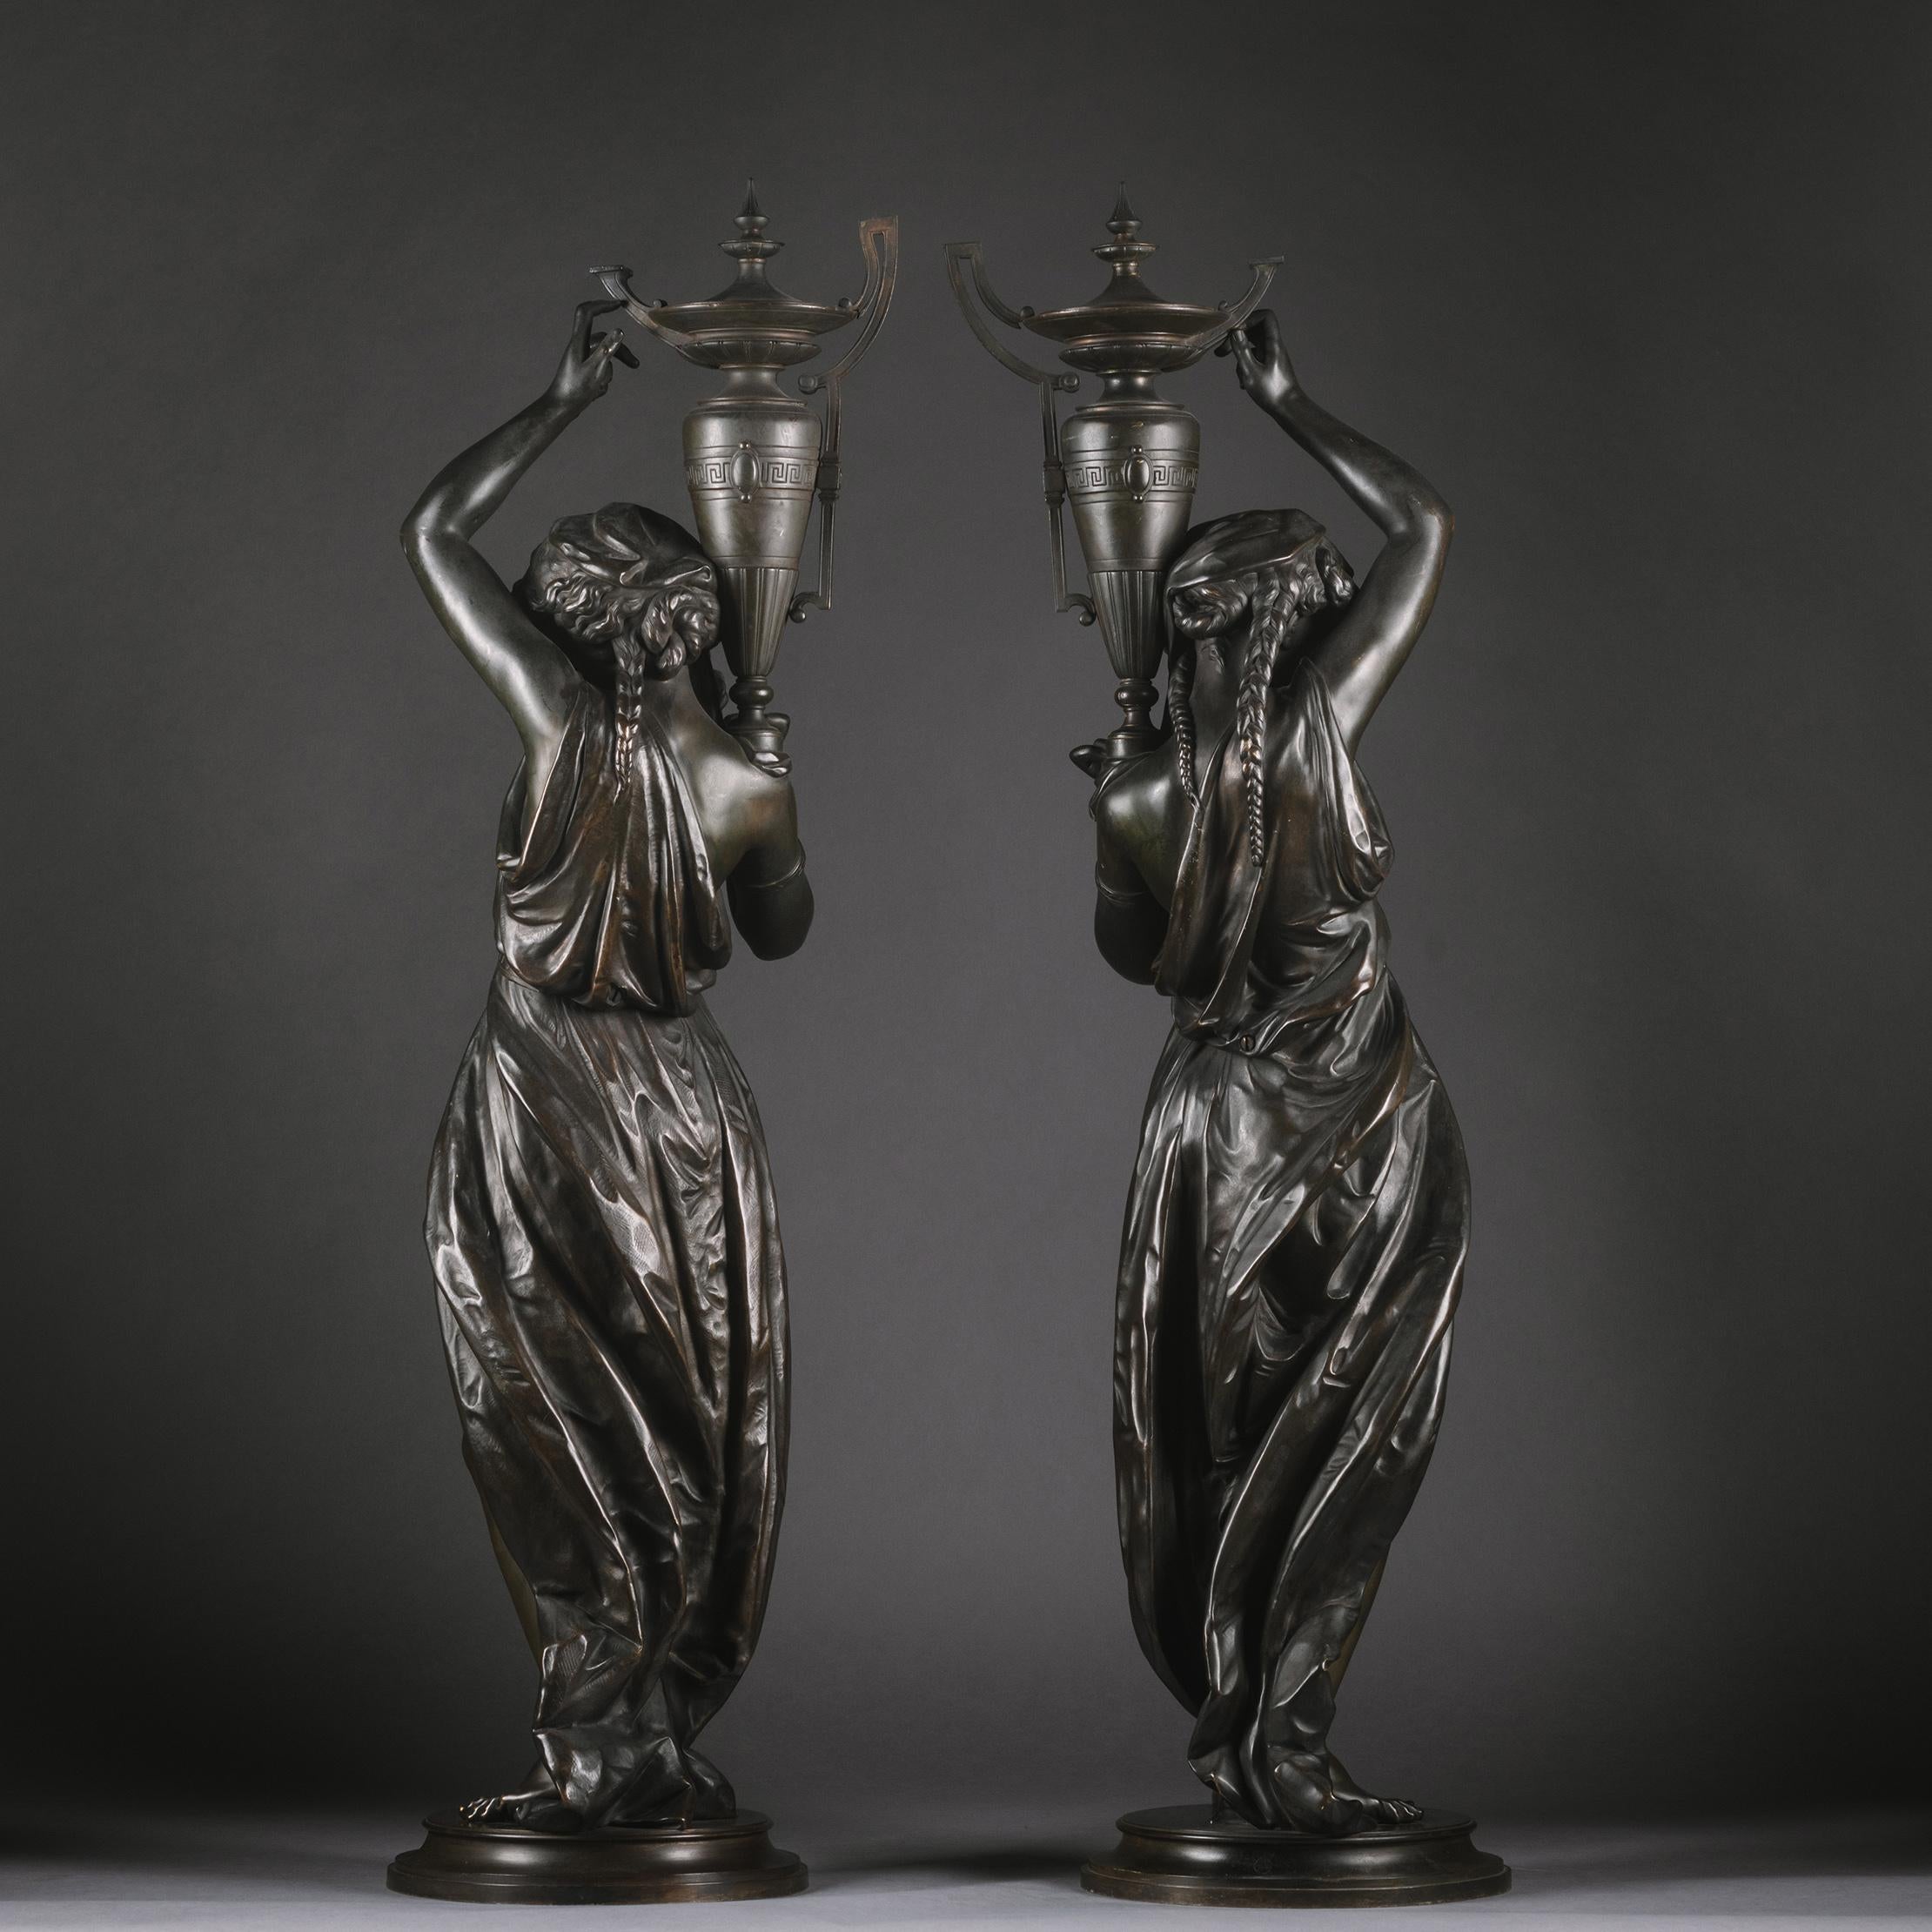 Victor Paillard (French, 1805-1886)
A Pair Of Napoleon III Patinated-Bronze Figures, Modelled As Classically Robed Maidens Bearing Urns.

The models attributed to Albert-Ernest Carrier-Belleuse (French, 1824-1887).

Each with oval stamp  'VOR